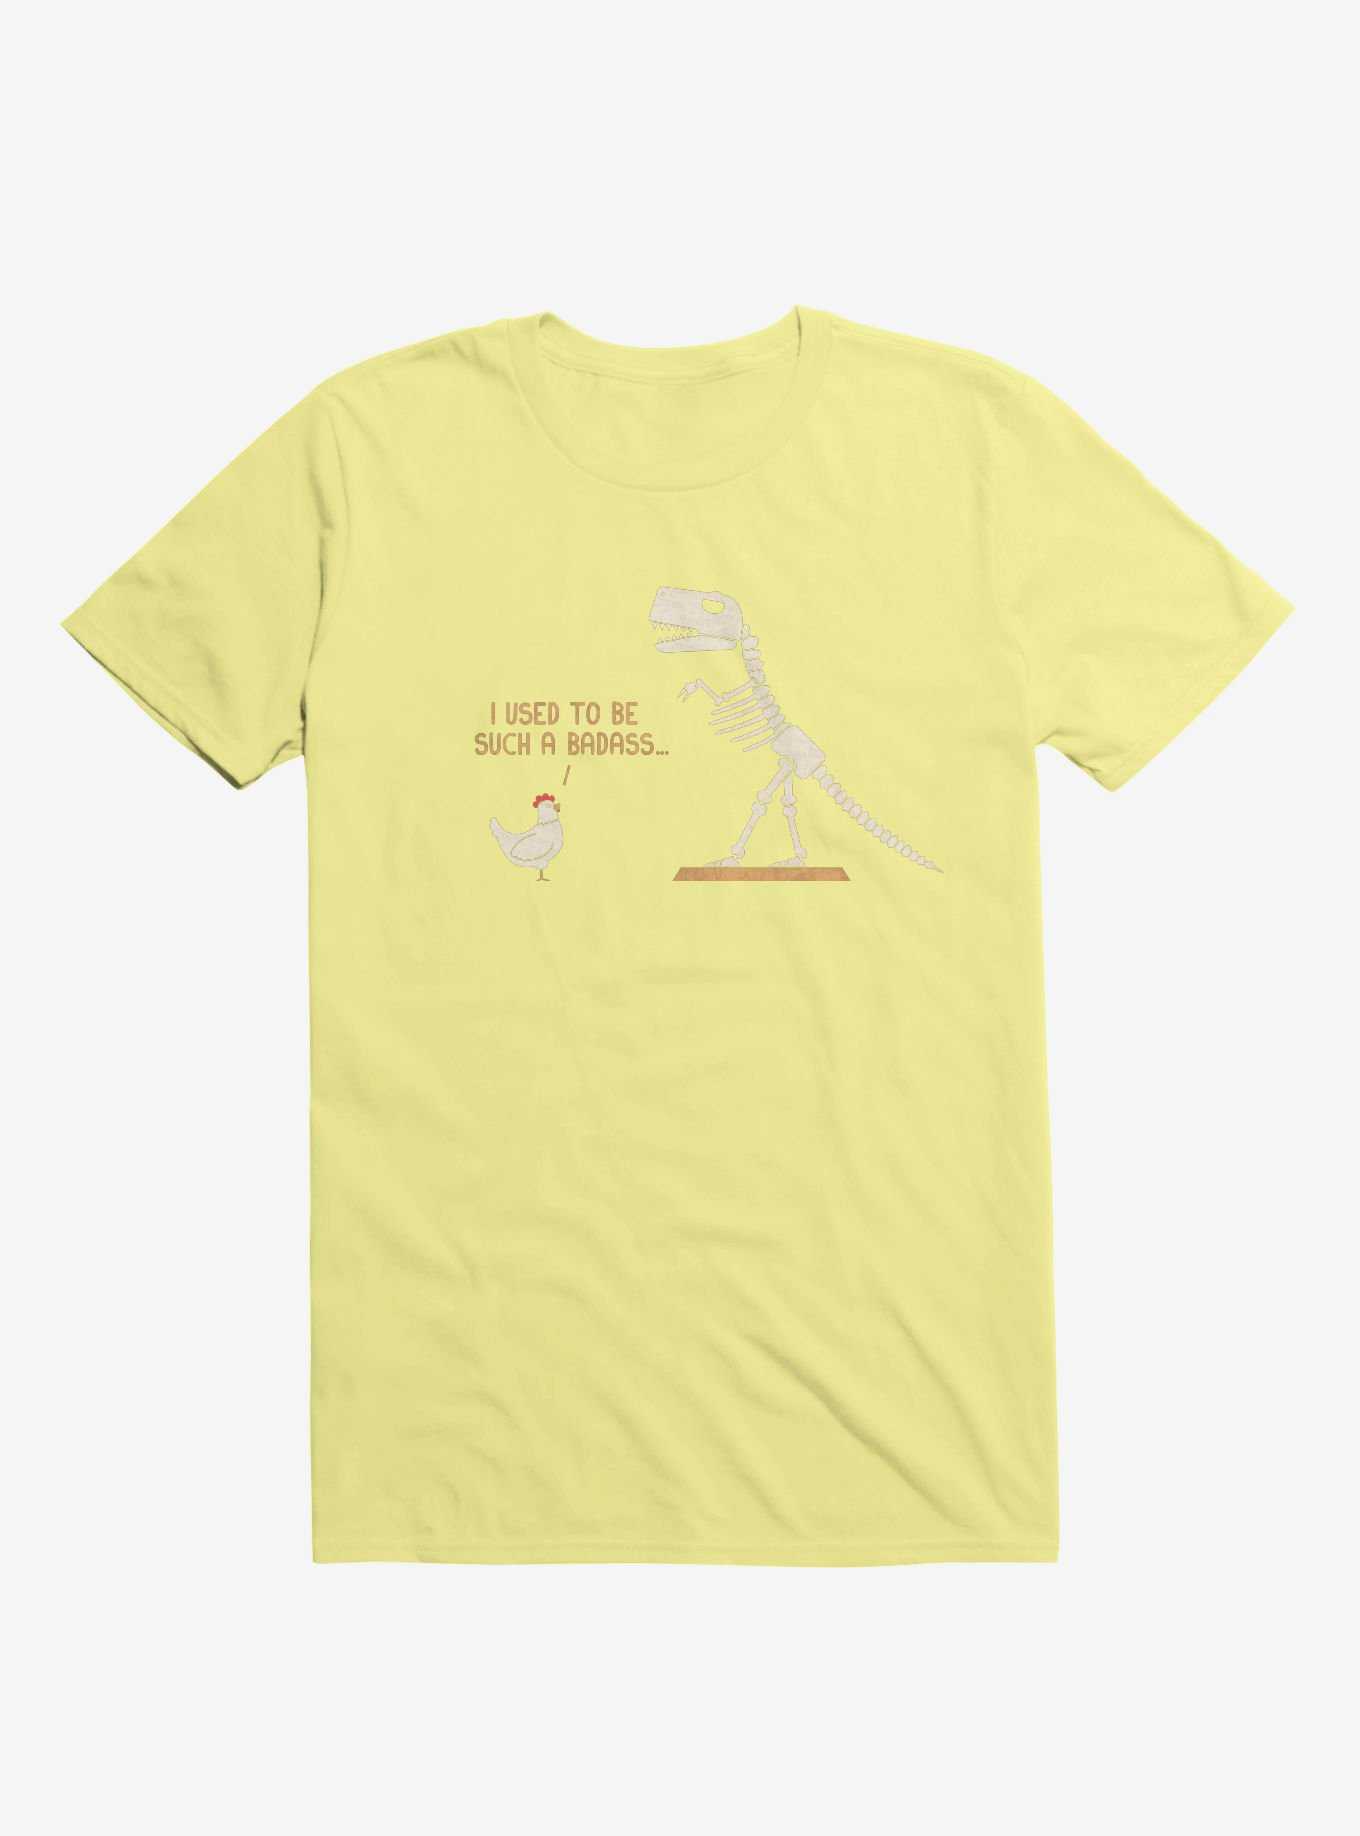 Chicken I Used To Be Bad... Corn Silk Yellow T-Shirt, , hi-res